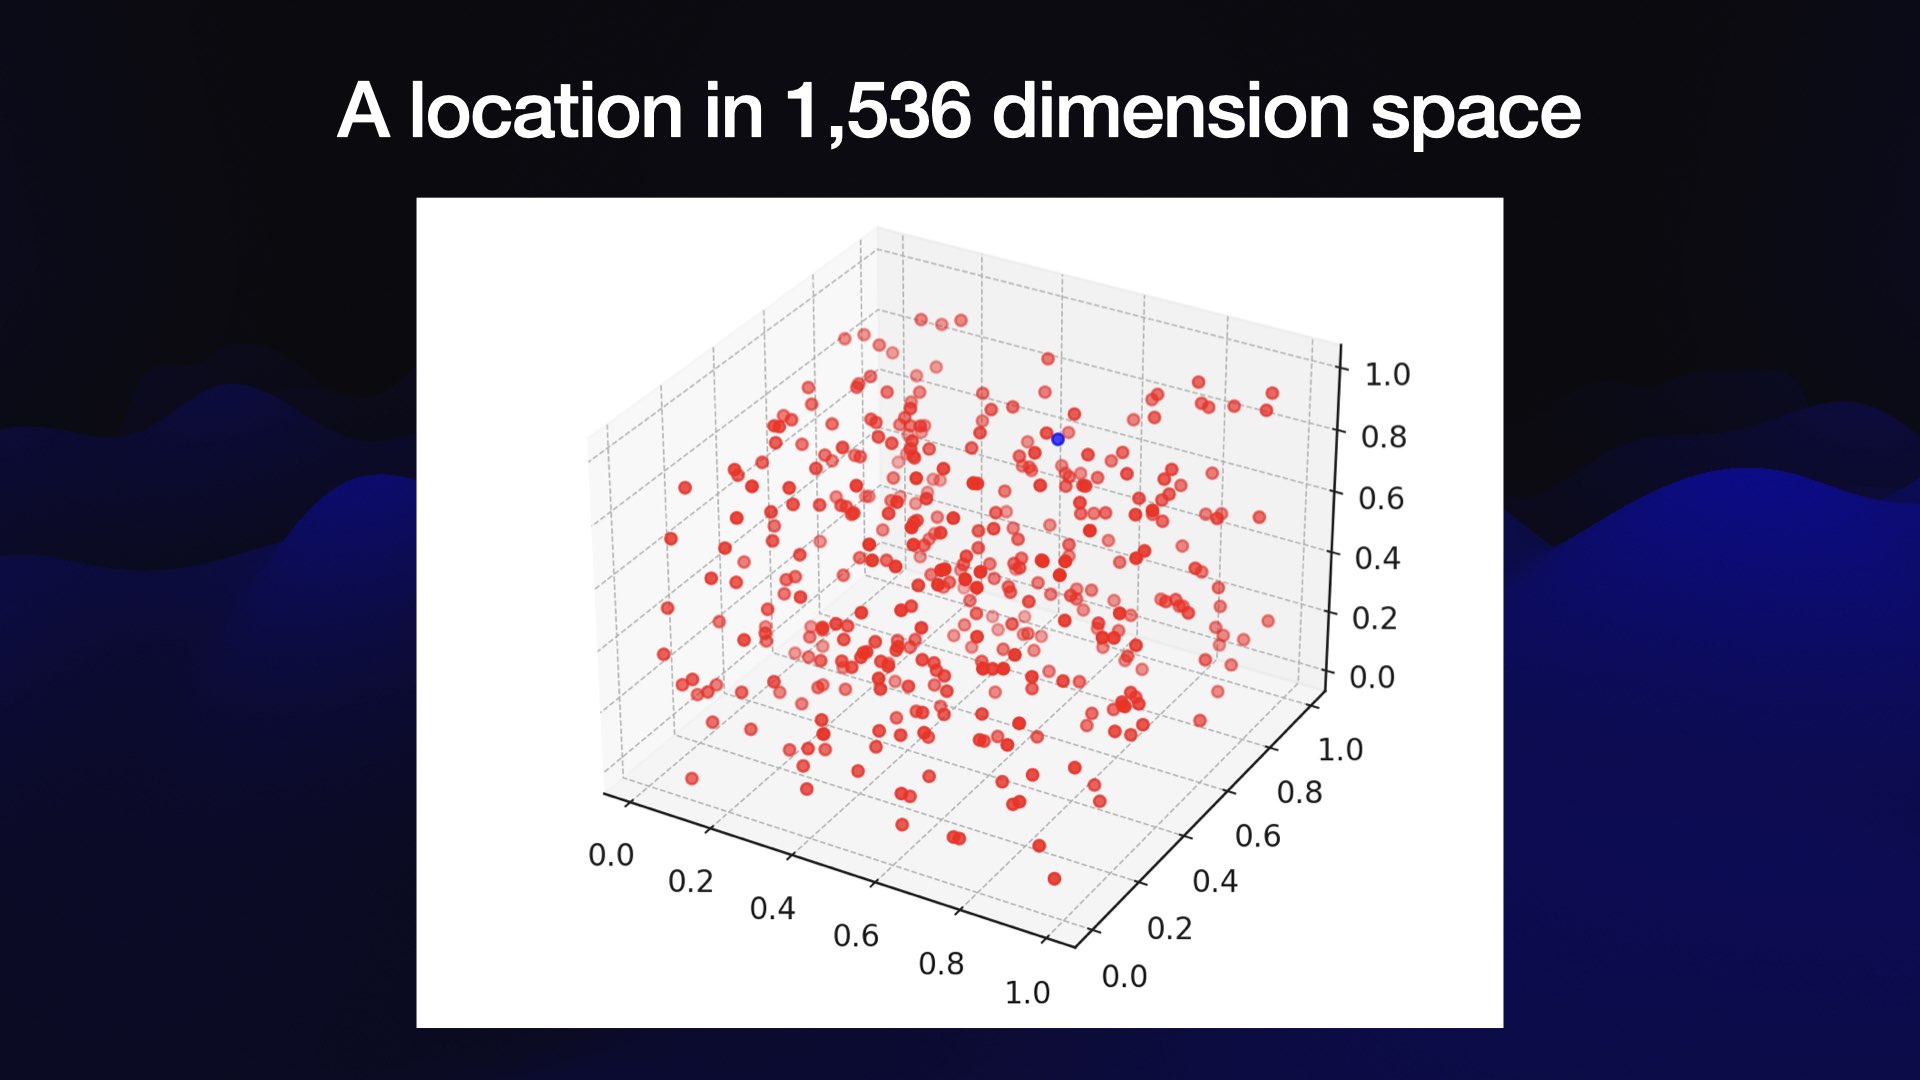 A location in 1,536 dimension space  There's a 3D plot with 400 red dots arranged randomly across 3 axis.